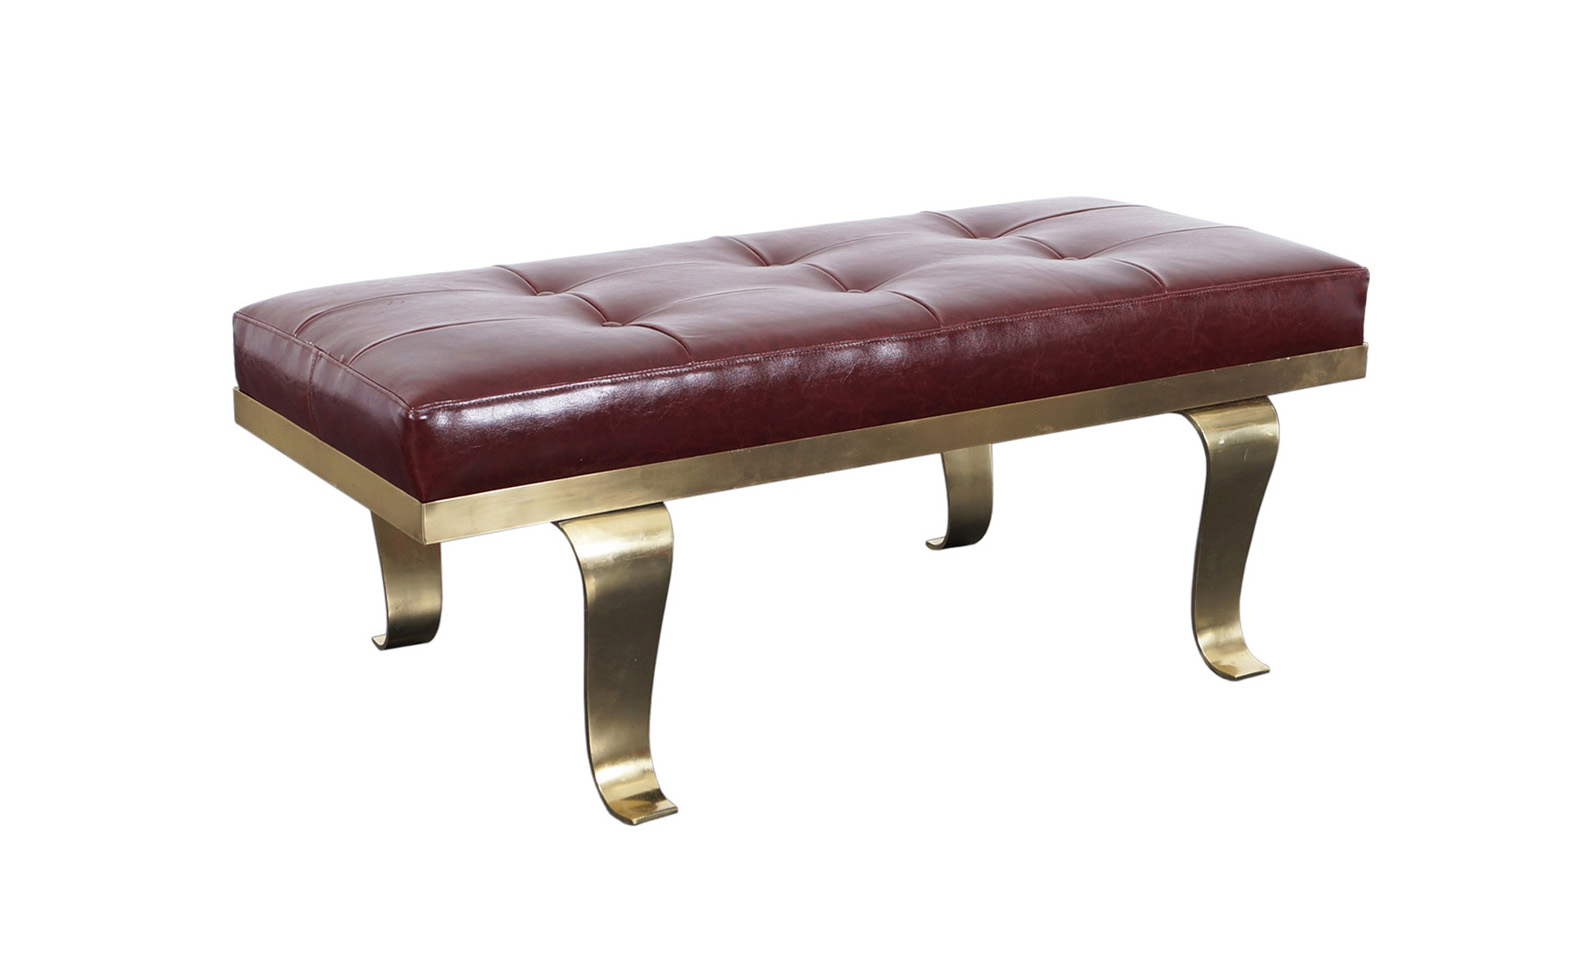 Modernist Brass & Leather Bench Attributed to Arturo Pani